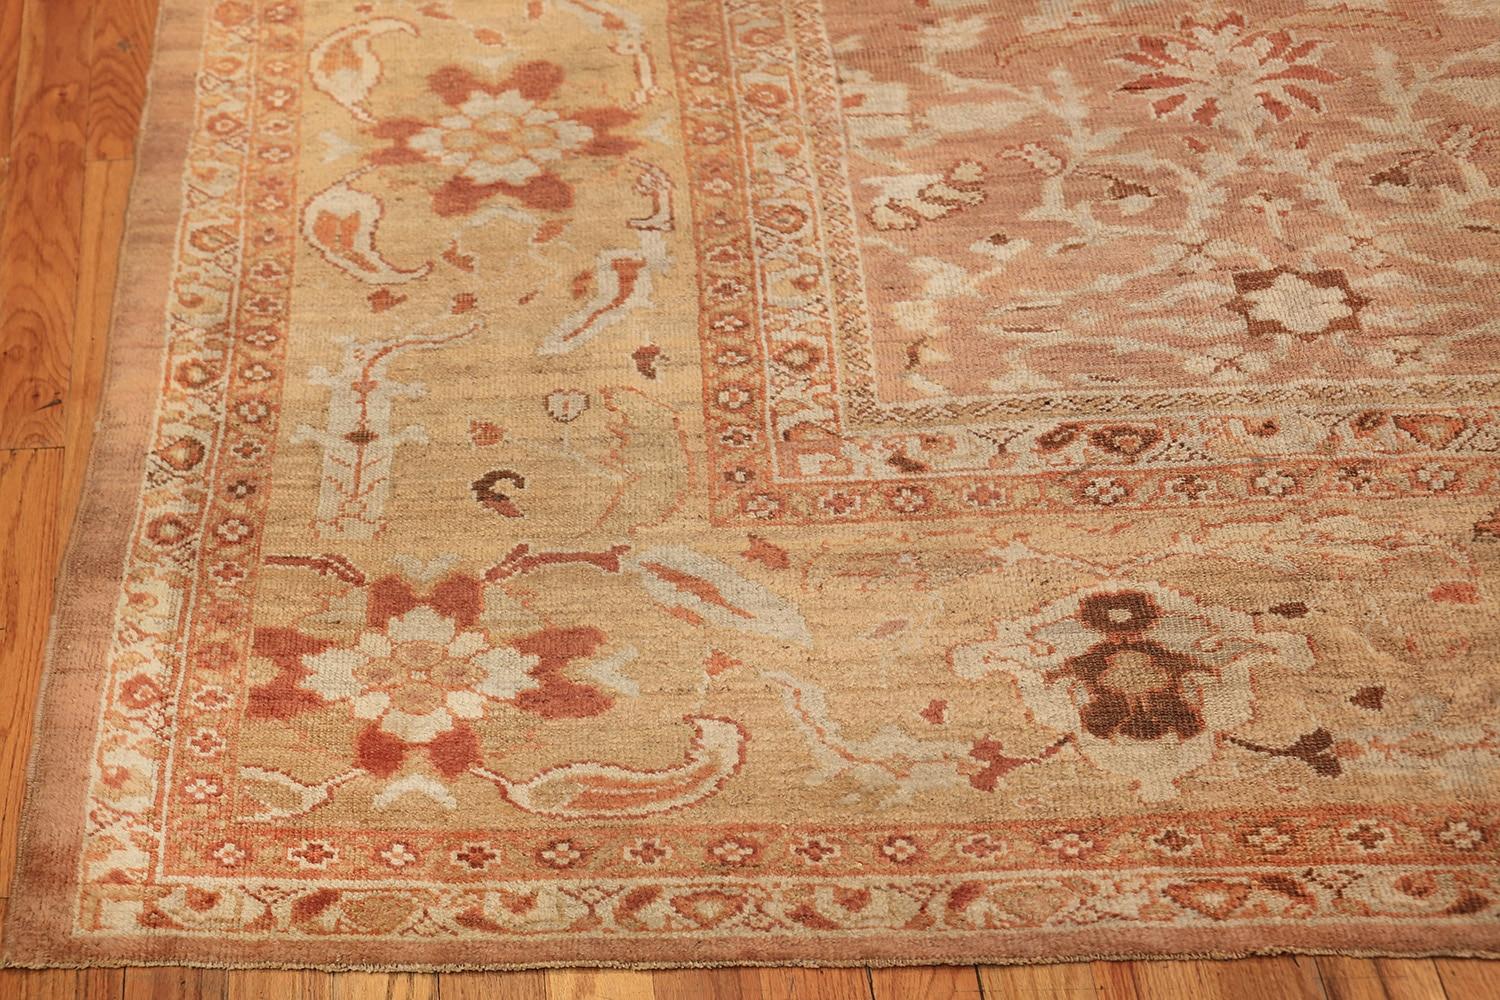 Beautiful Large and Decorative Antique Persian Ziegler Sultanabad Rug, Country Of Origin / Rug Type: Antique Persian Rug, Circa Date: Late 19th Century. Size: 11 ft x 15 ft (3.35 m x 4.57 m)

